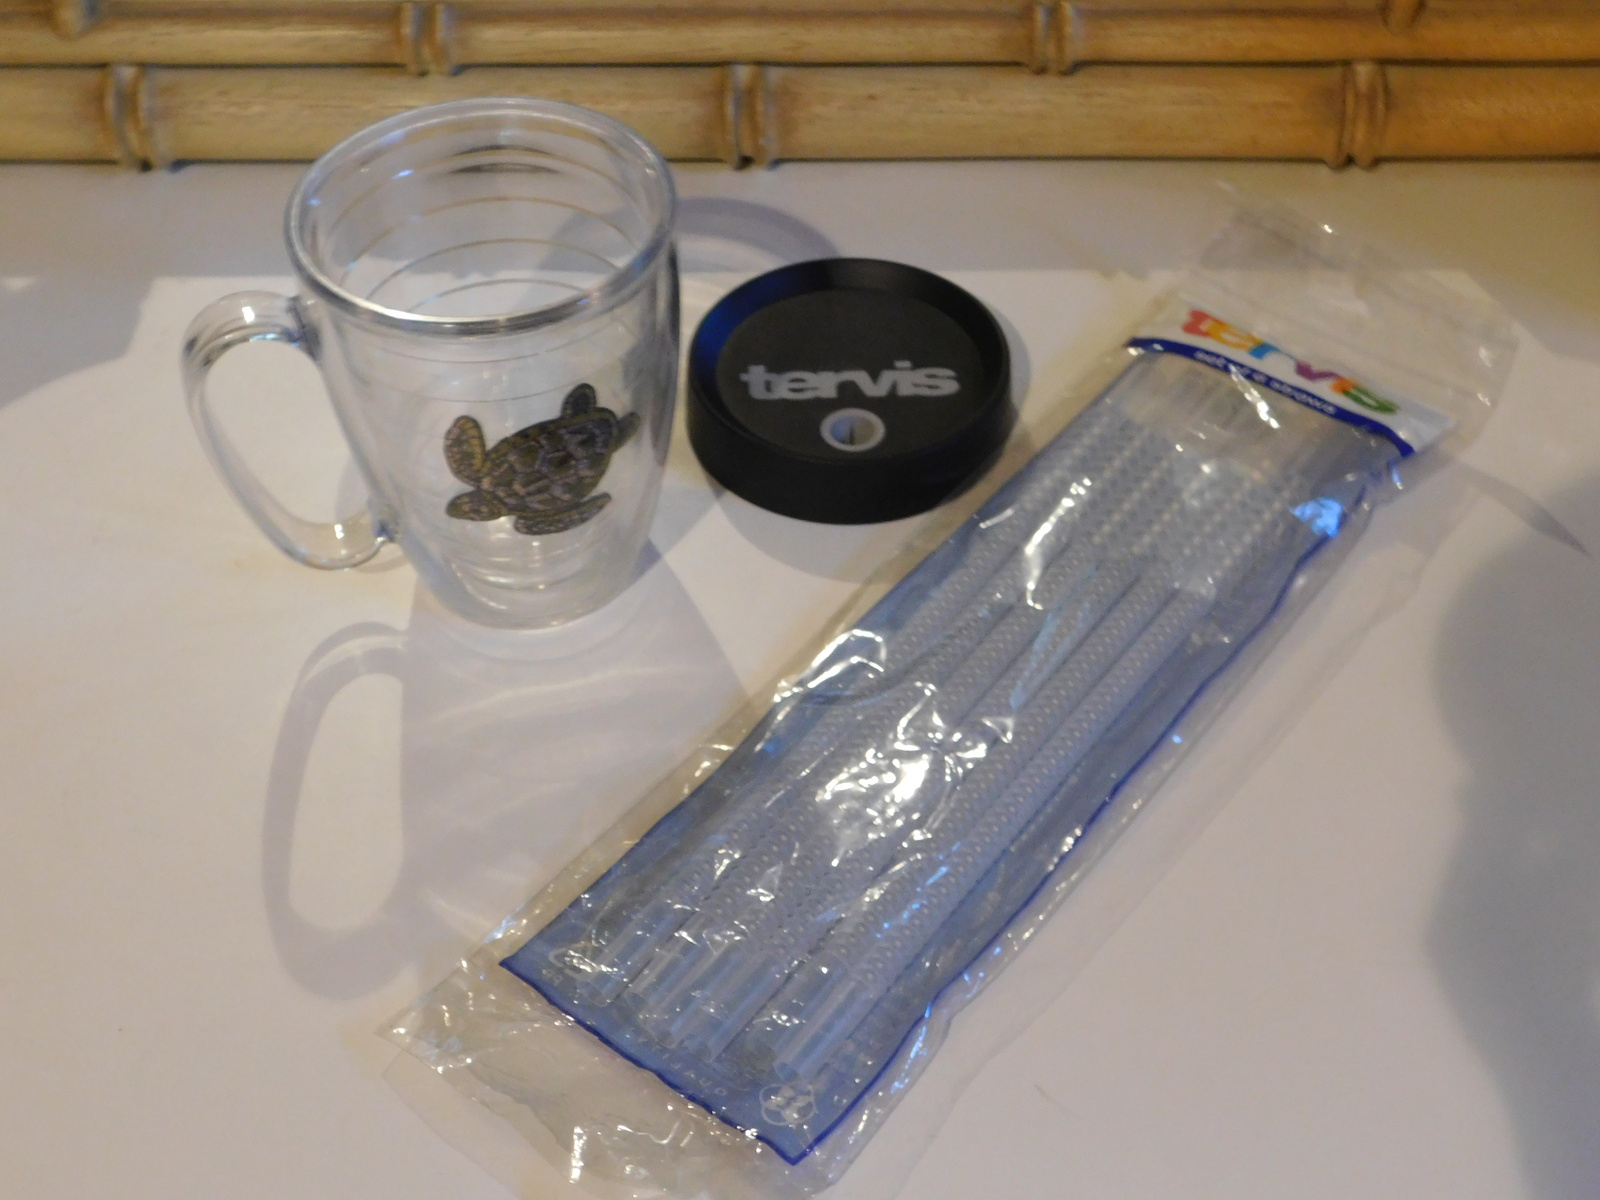 Primary image for Tervis Tumbler Sea Turtle 15oz Mug with lid and package of adjustable straws